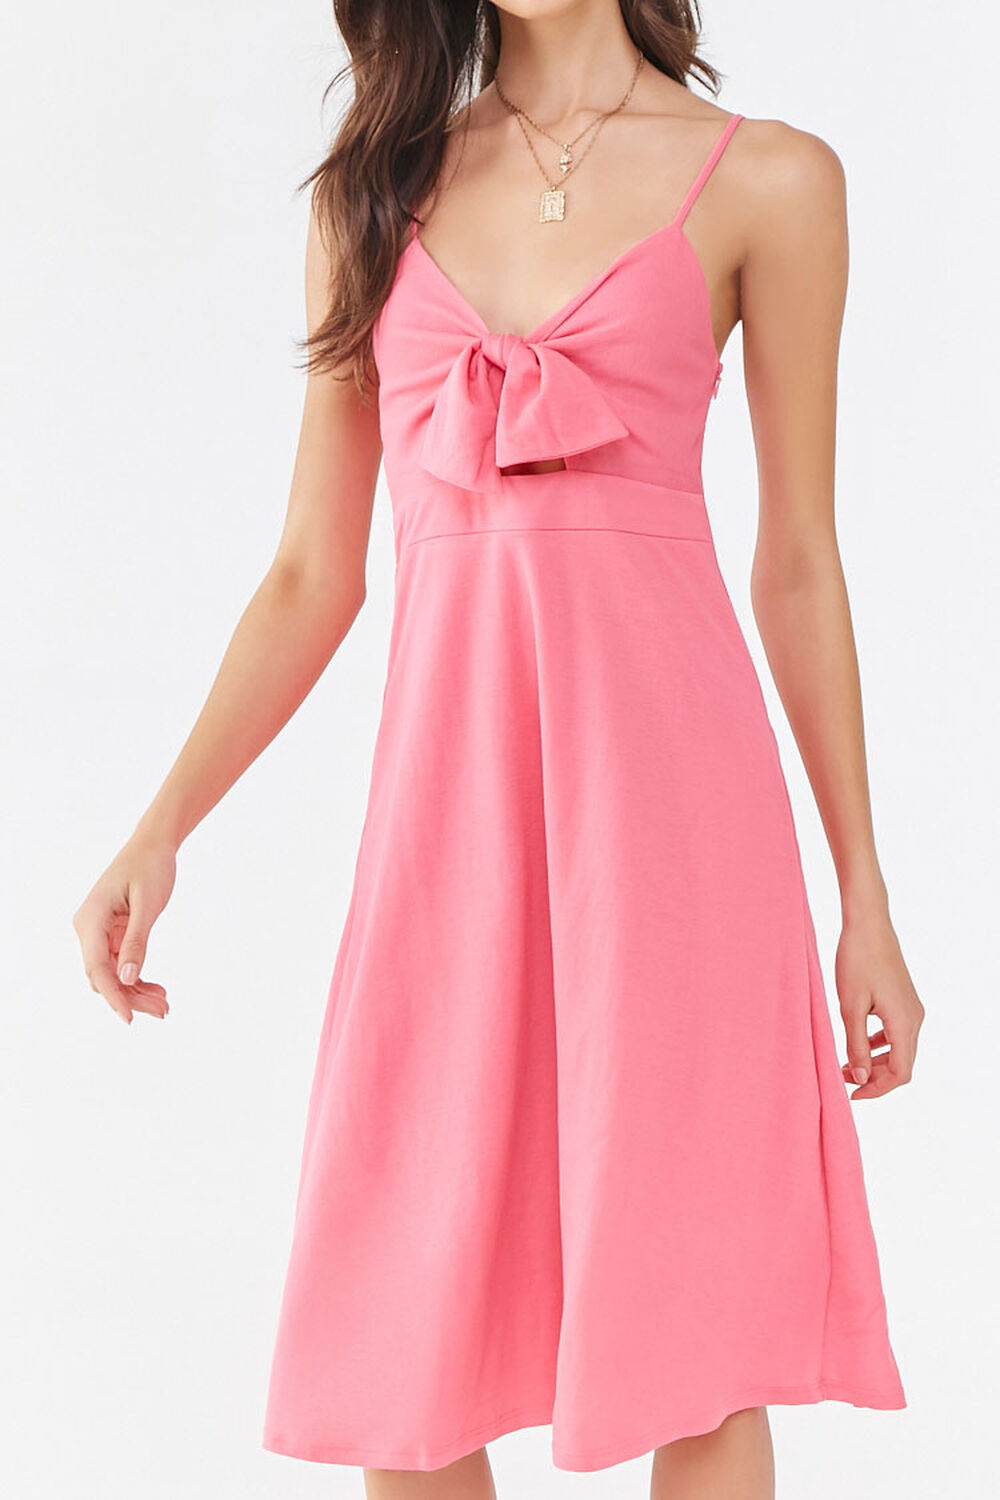 PINK Knotted Cami Midi Dress, image 2